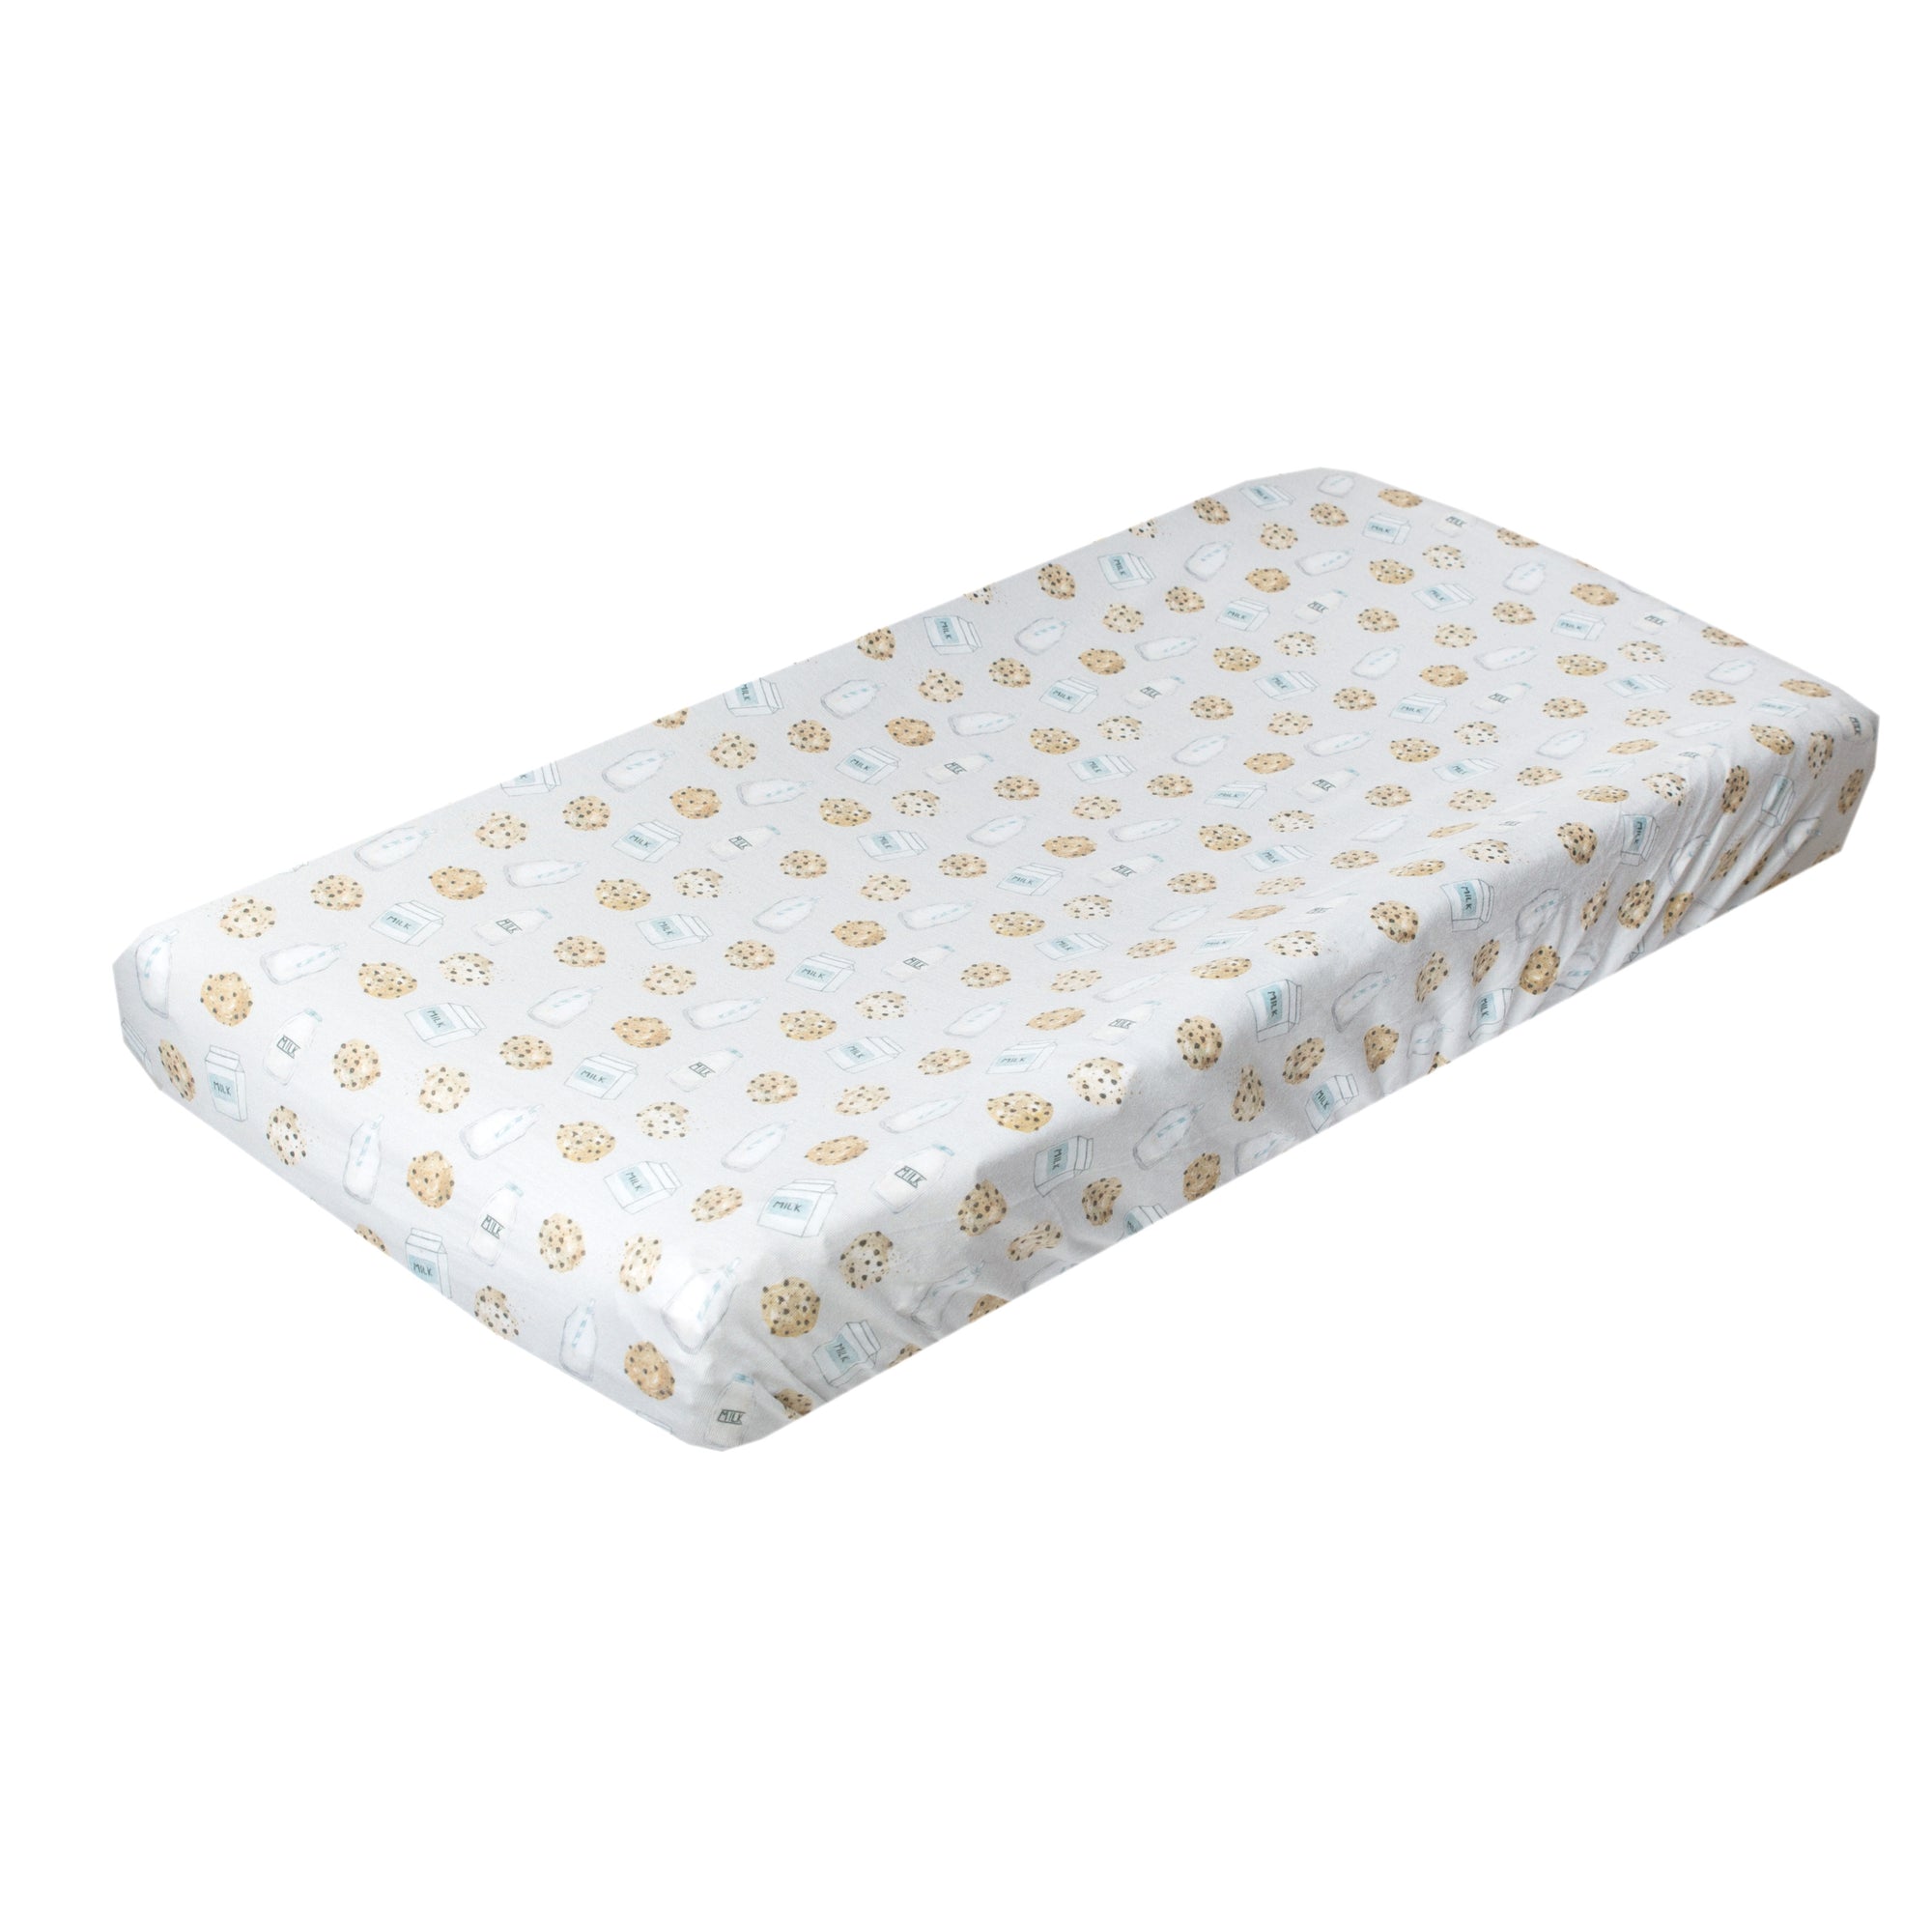 Premium Knit Diaper Changing Pad Cover - Chip